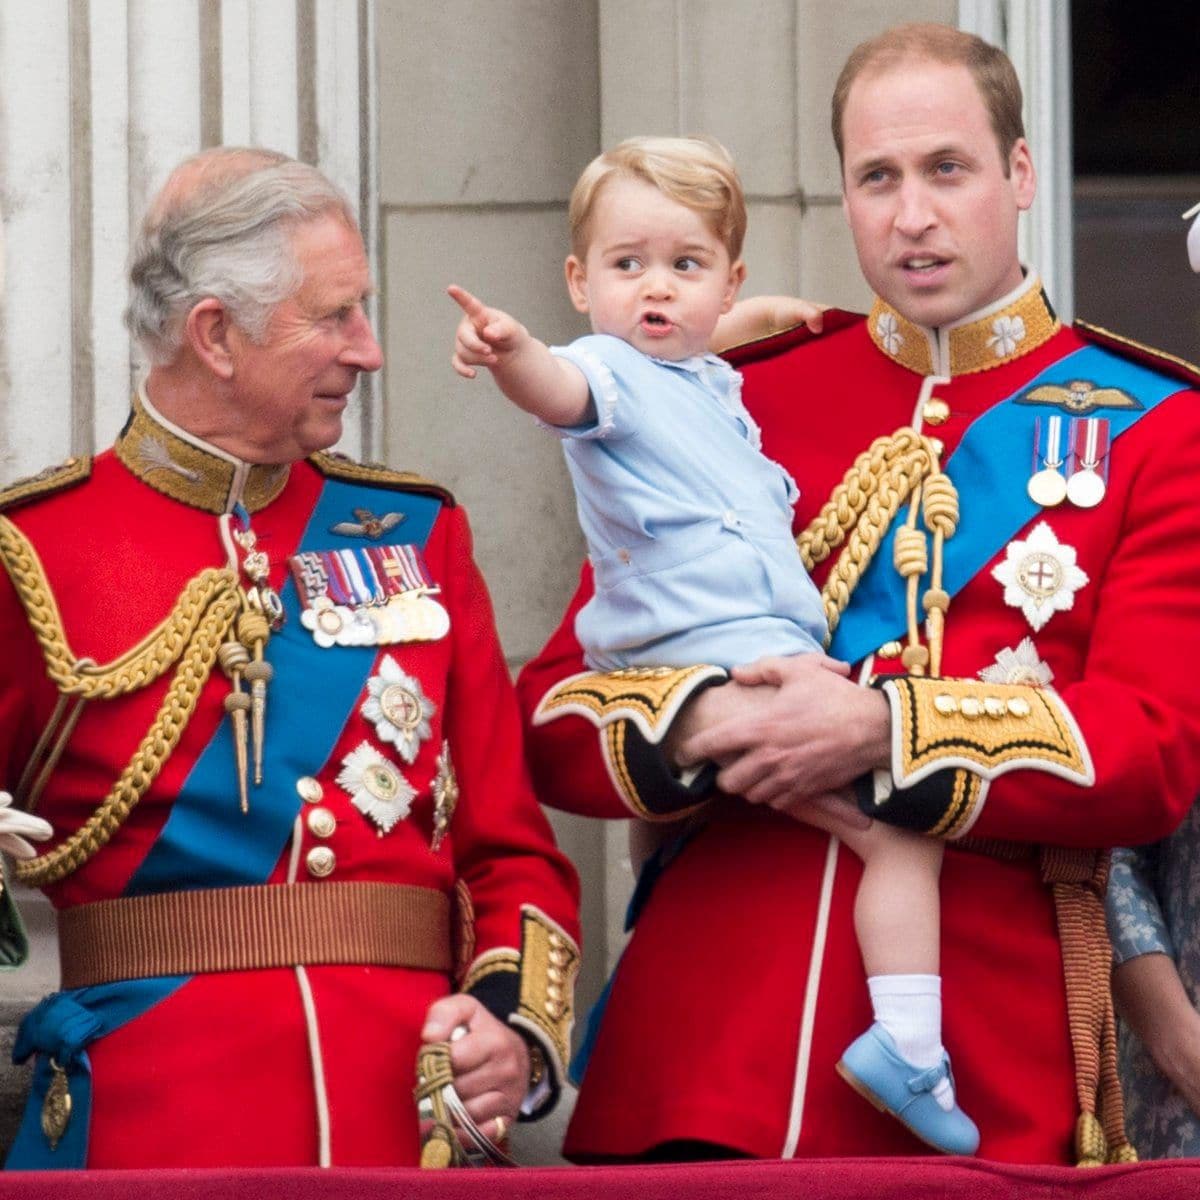 Prince Charles revealed that his grandson Prince George is already learning about the impact of climate change